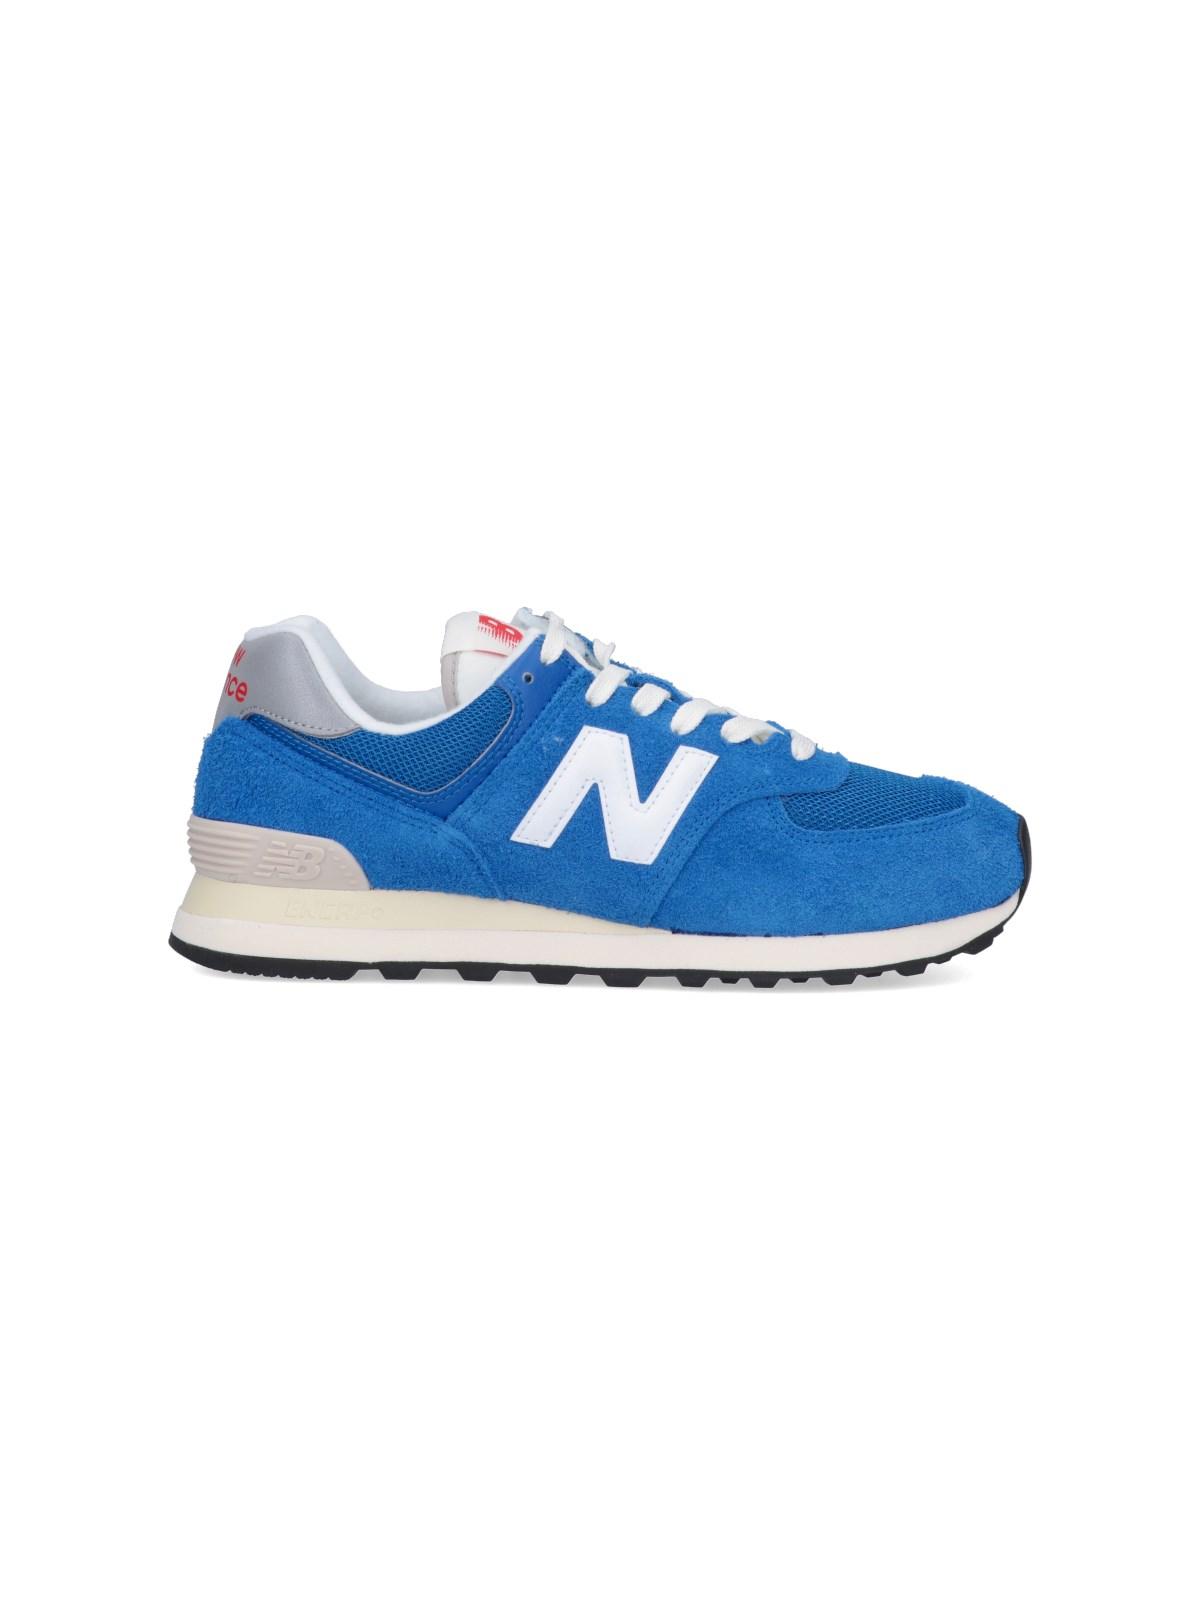 New Balance '574 American Blue' Sneakers | Lyst